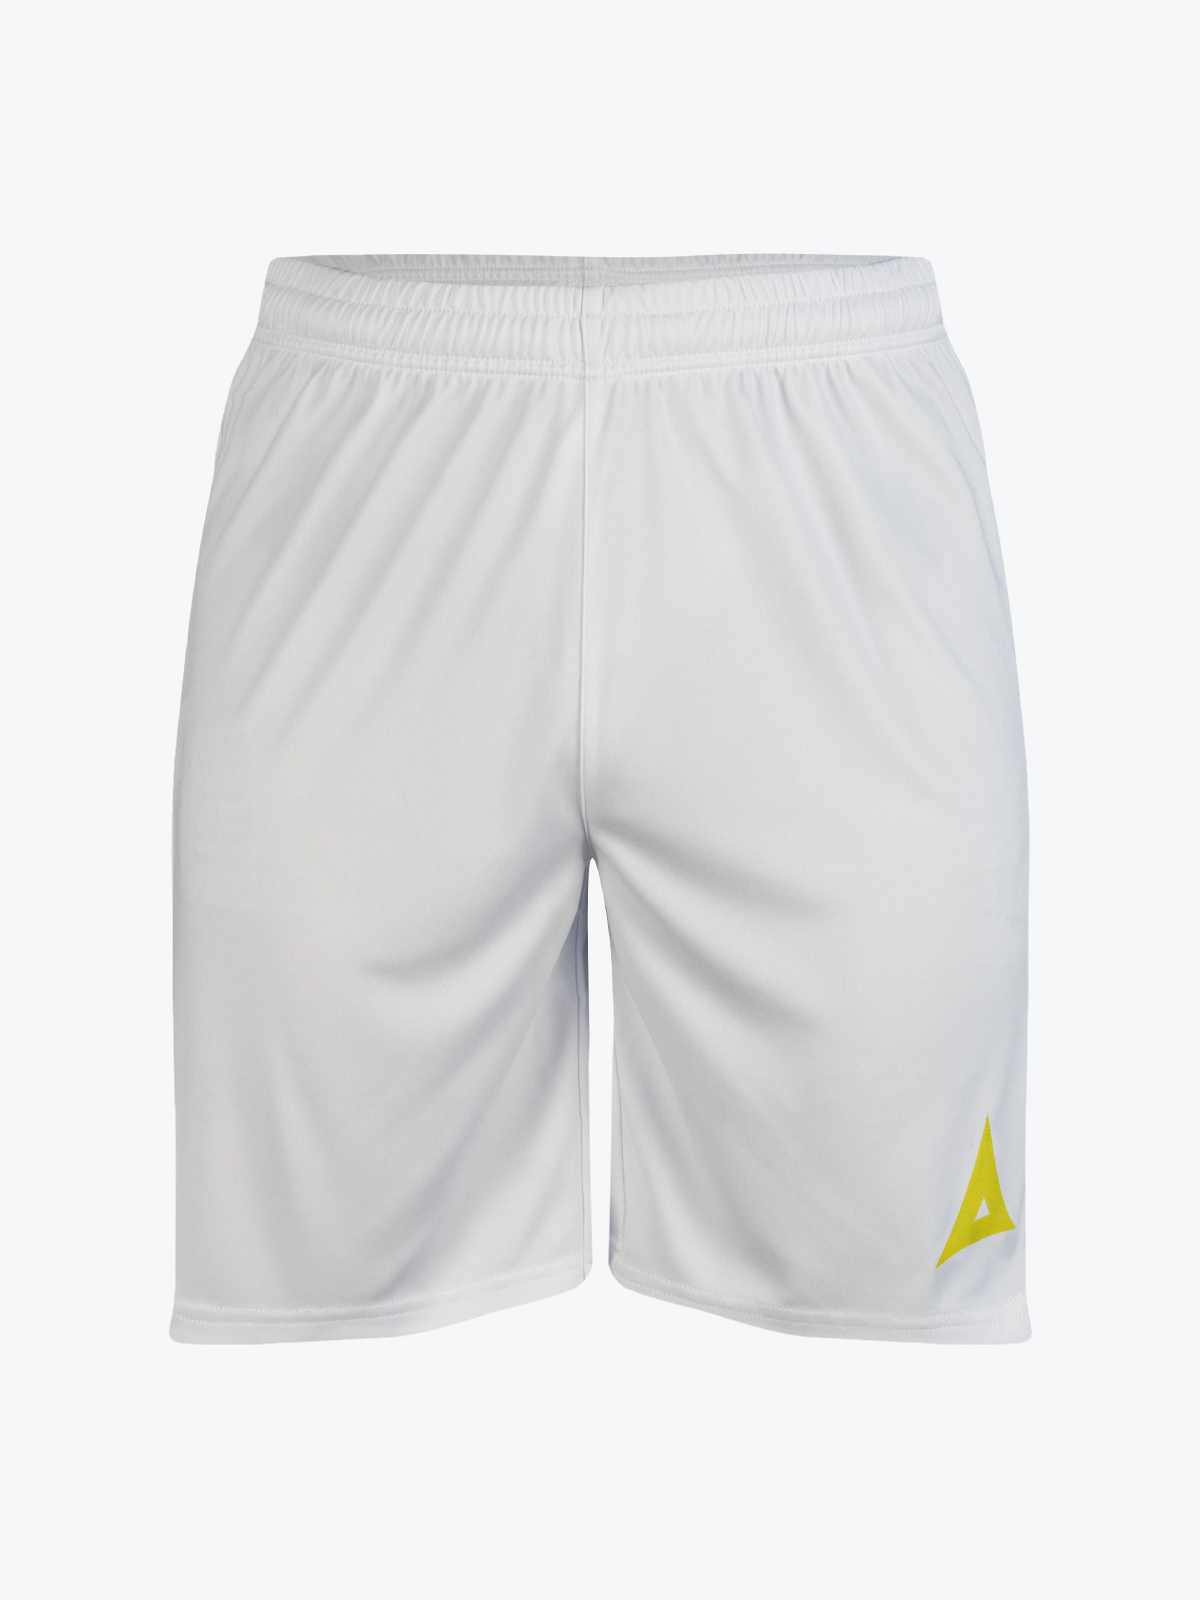 picture of focus 2 classic short - white/yellow